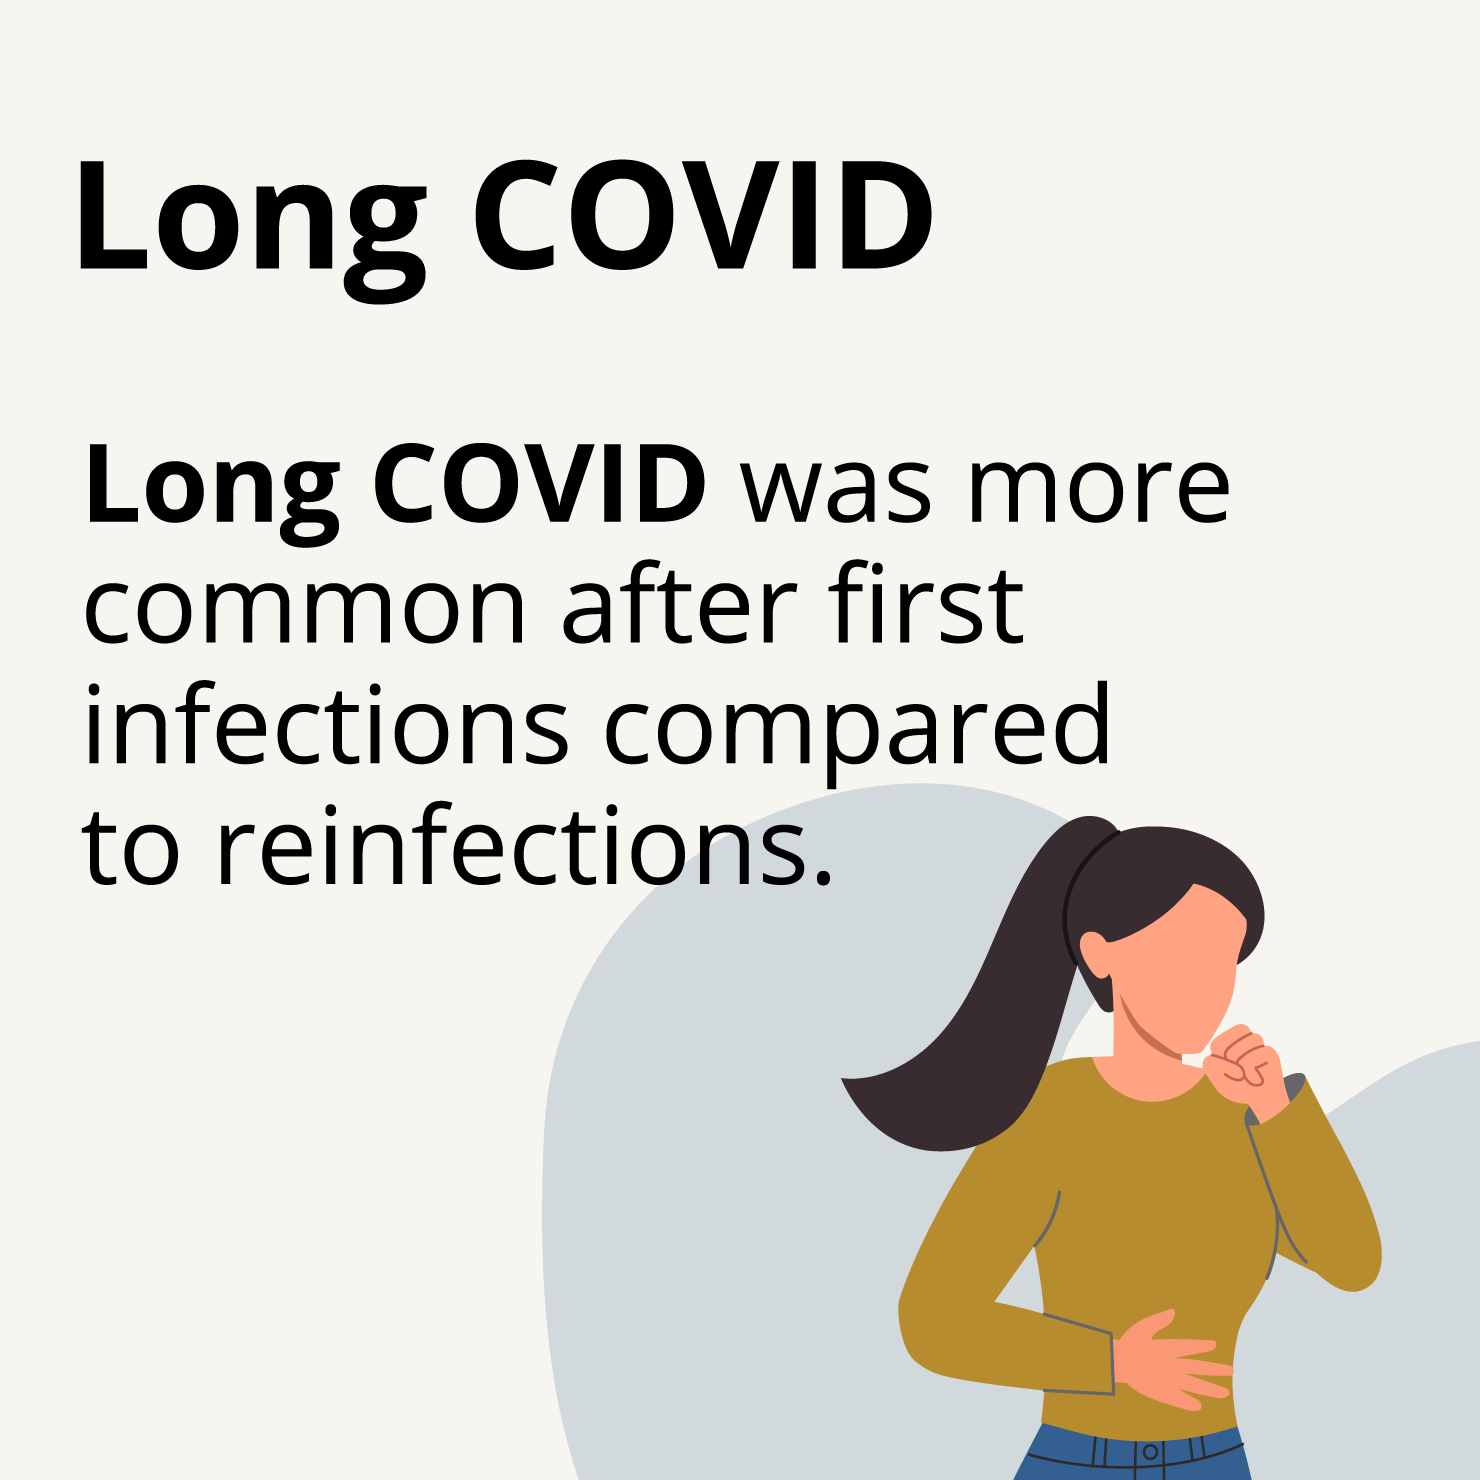 Long COVID: Long COVID was more common after first infections compared to reinfections.